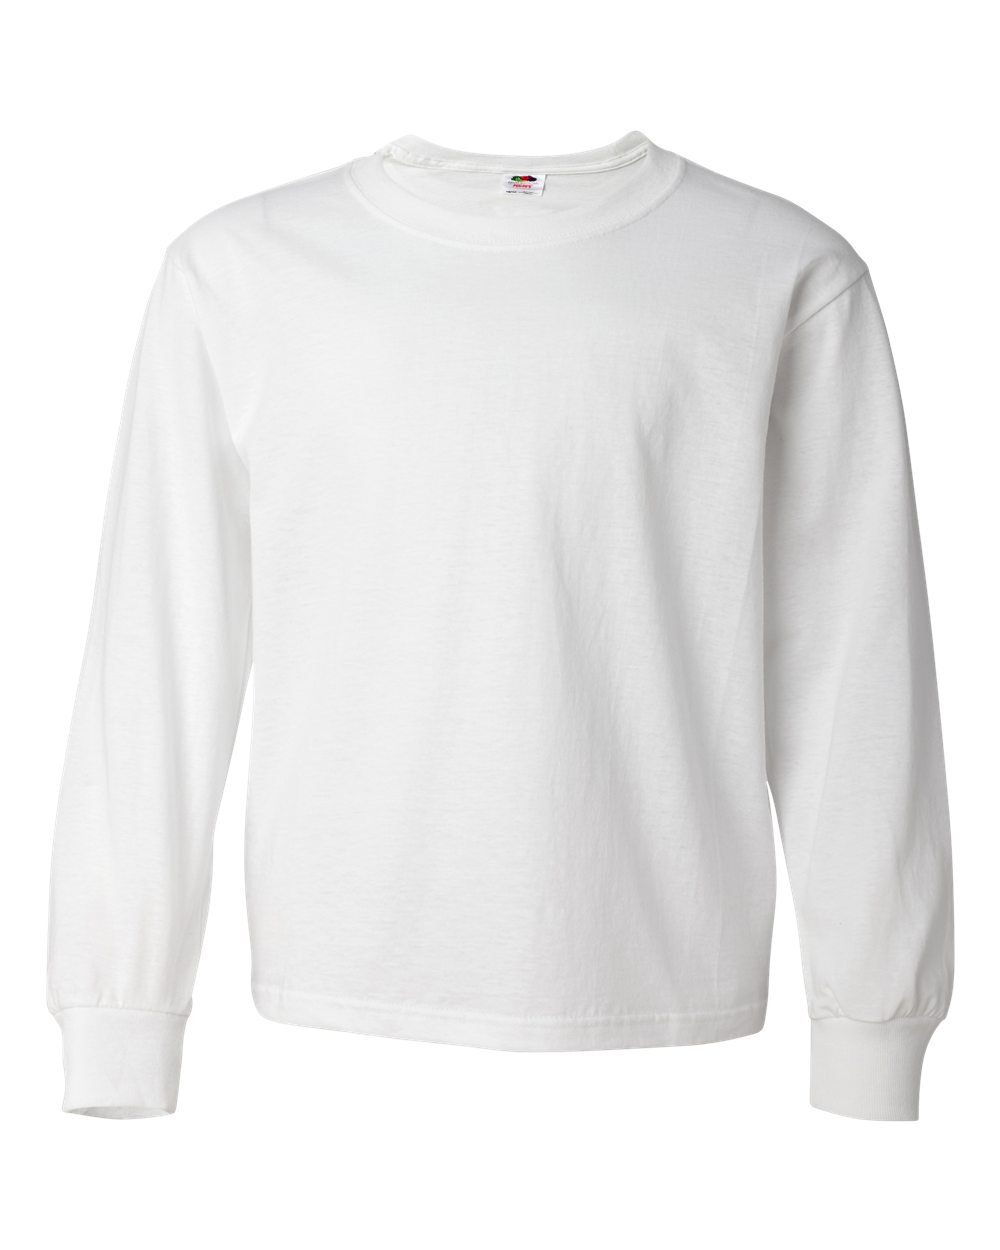 HD Cotton Youth Long Sleeve T-Shirt - 4930BR-Fruit of the Loom